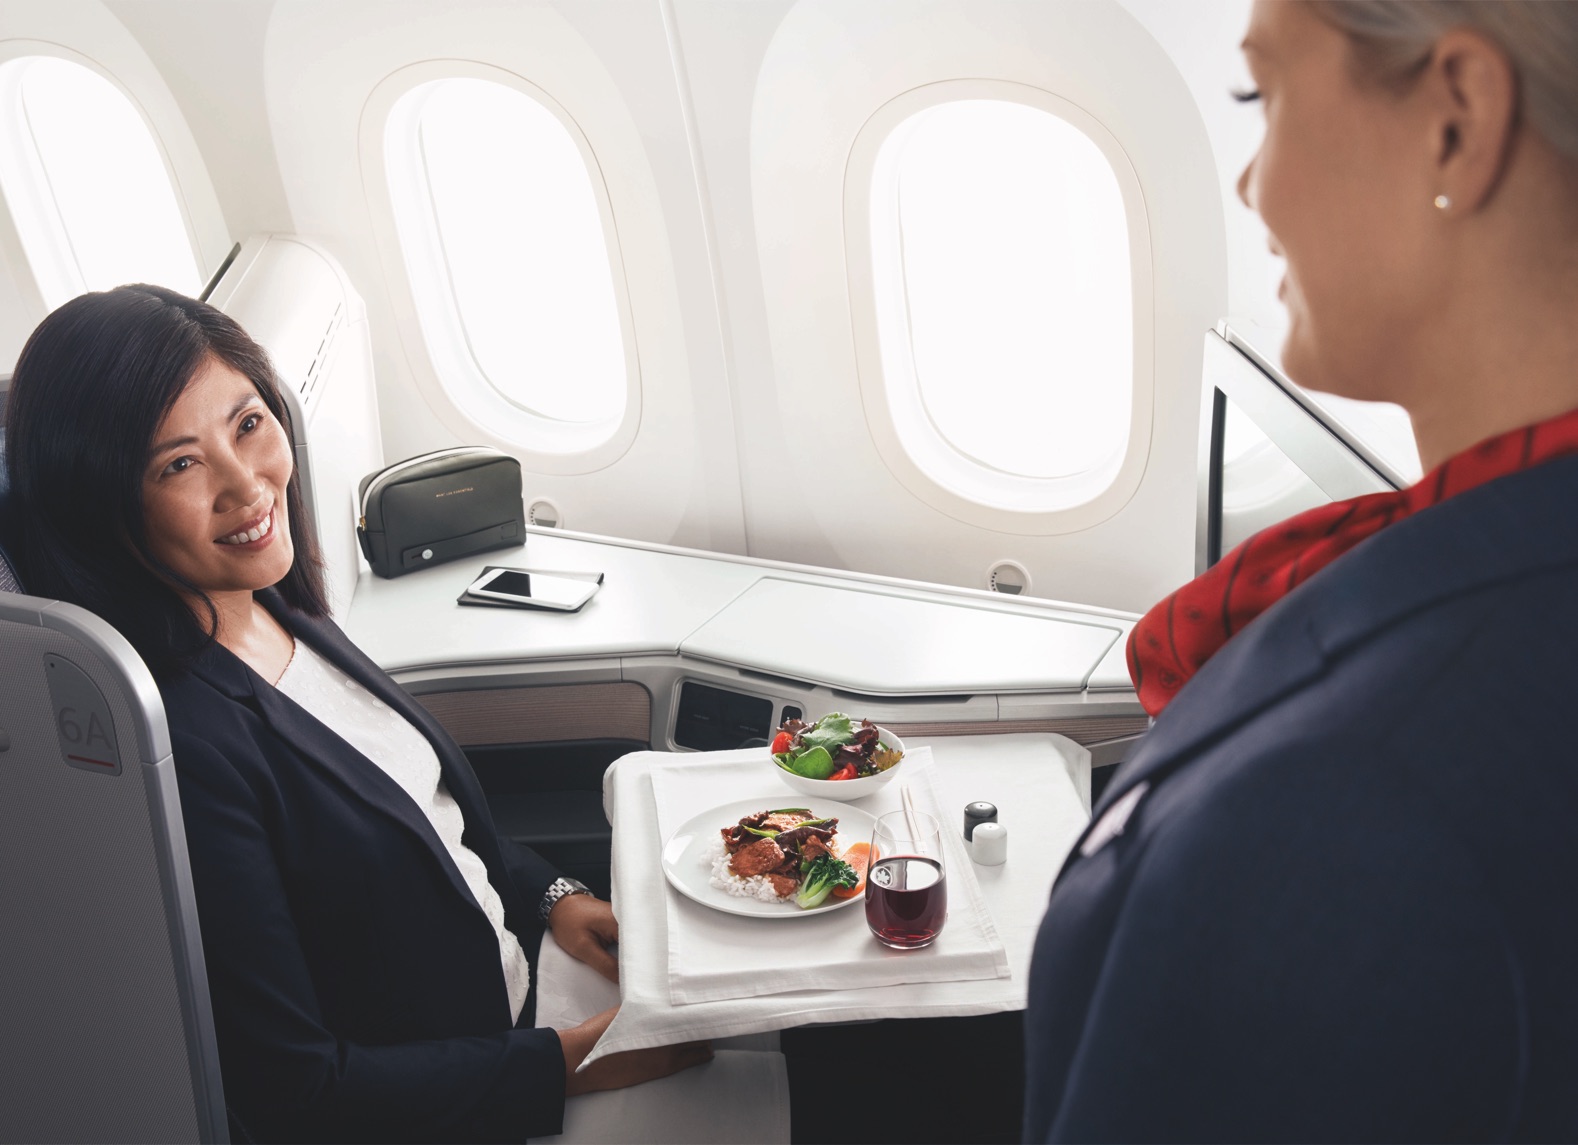 Genuine hospitality and a cutting-edge new business class product have helped Air Canada spearhead premium travel in North America and across to Asia, discovers Nick Walton on a recent flight from Hong Kong to Vancouver.